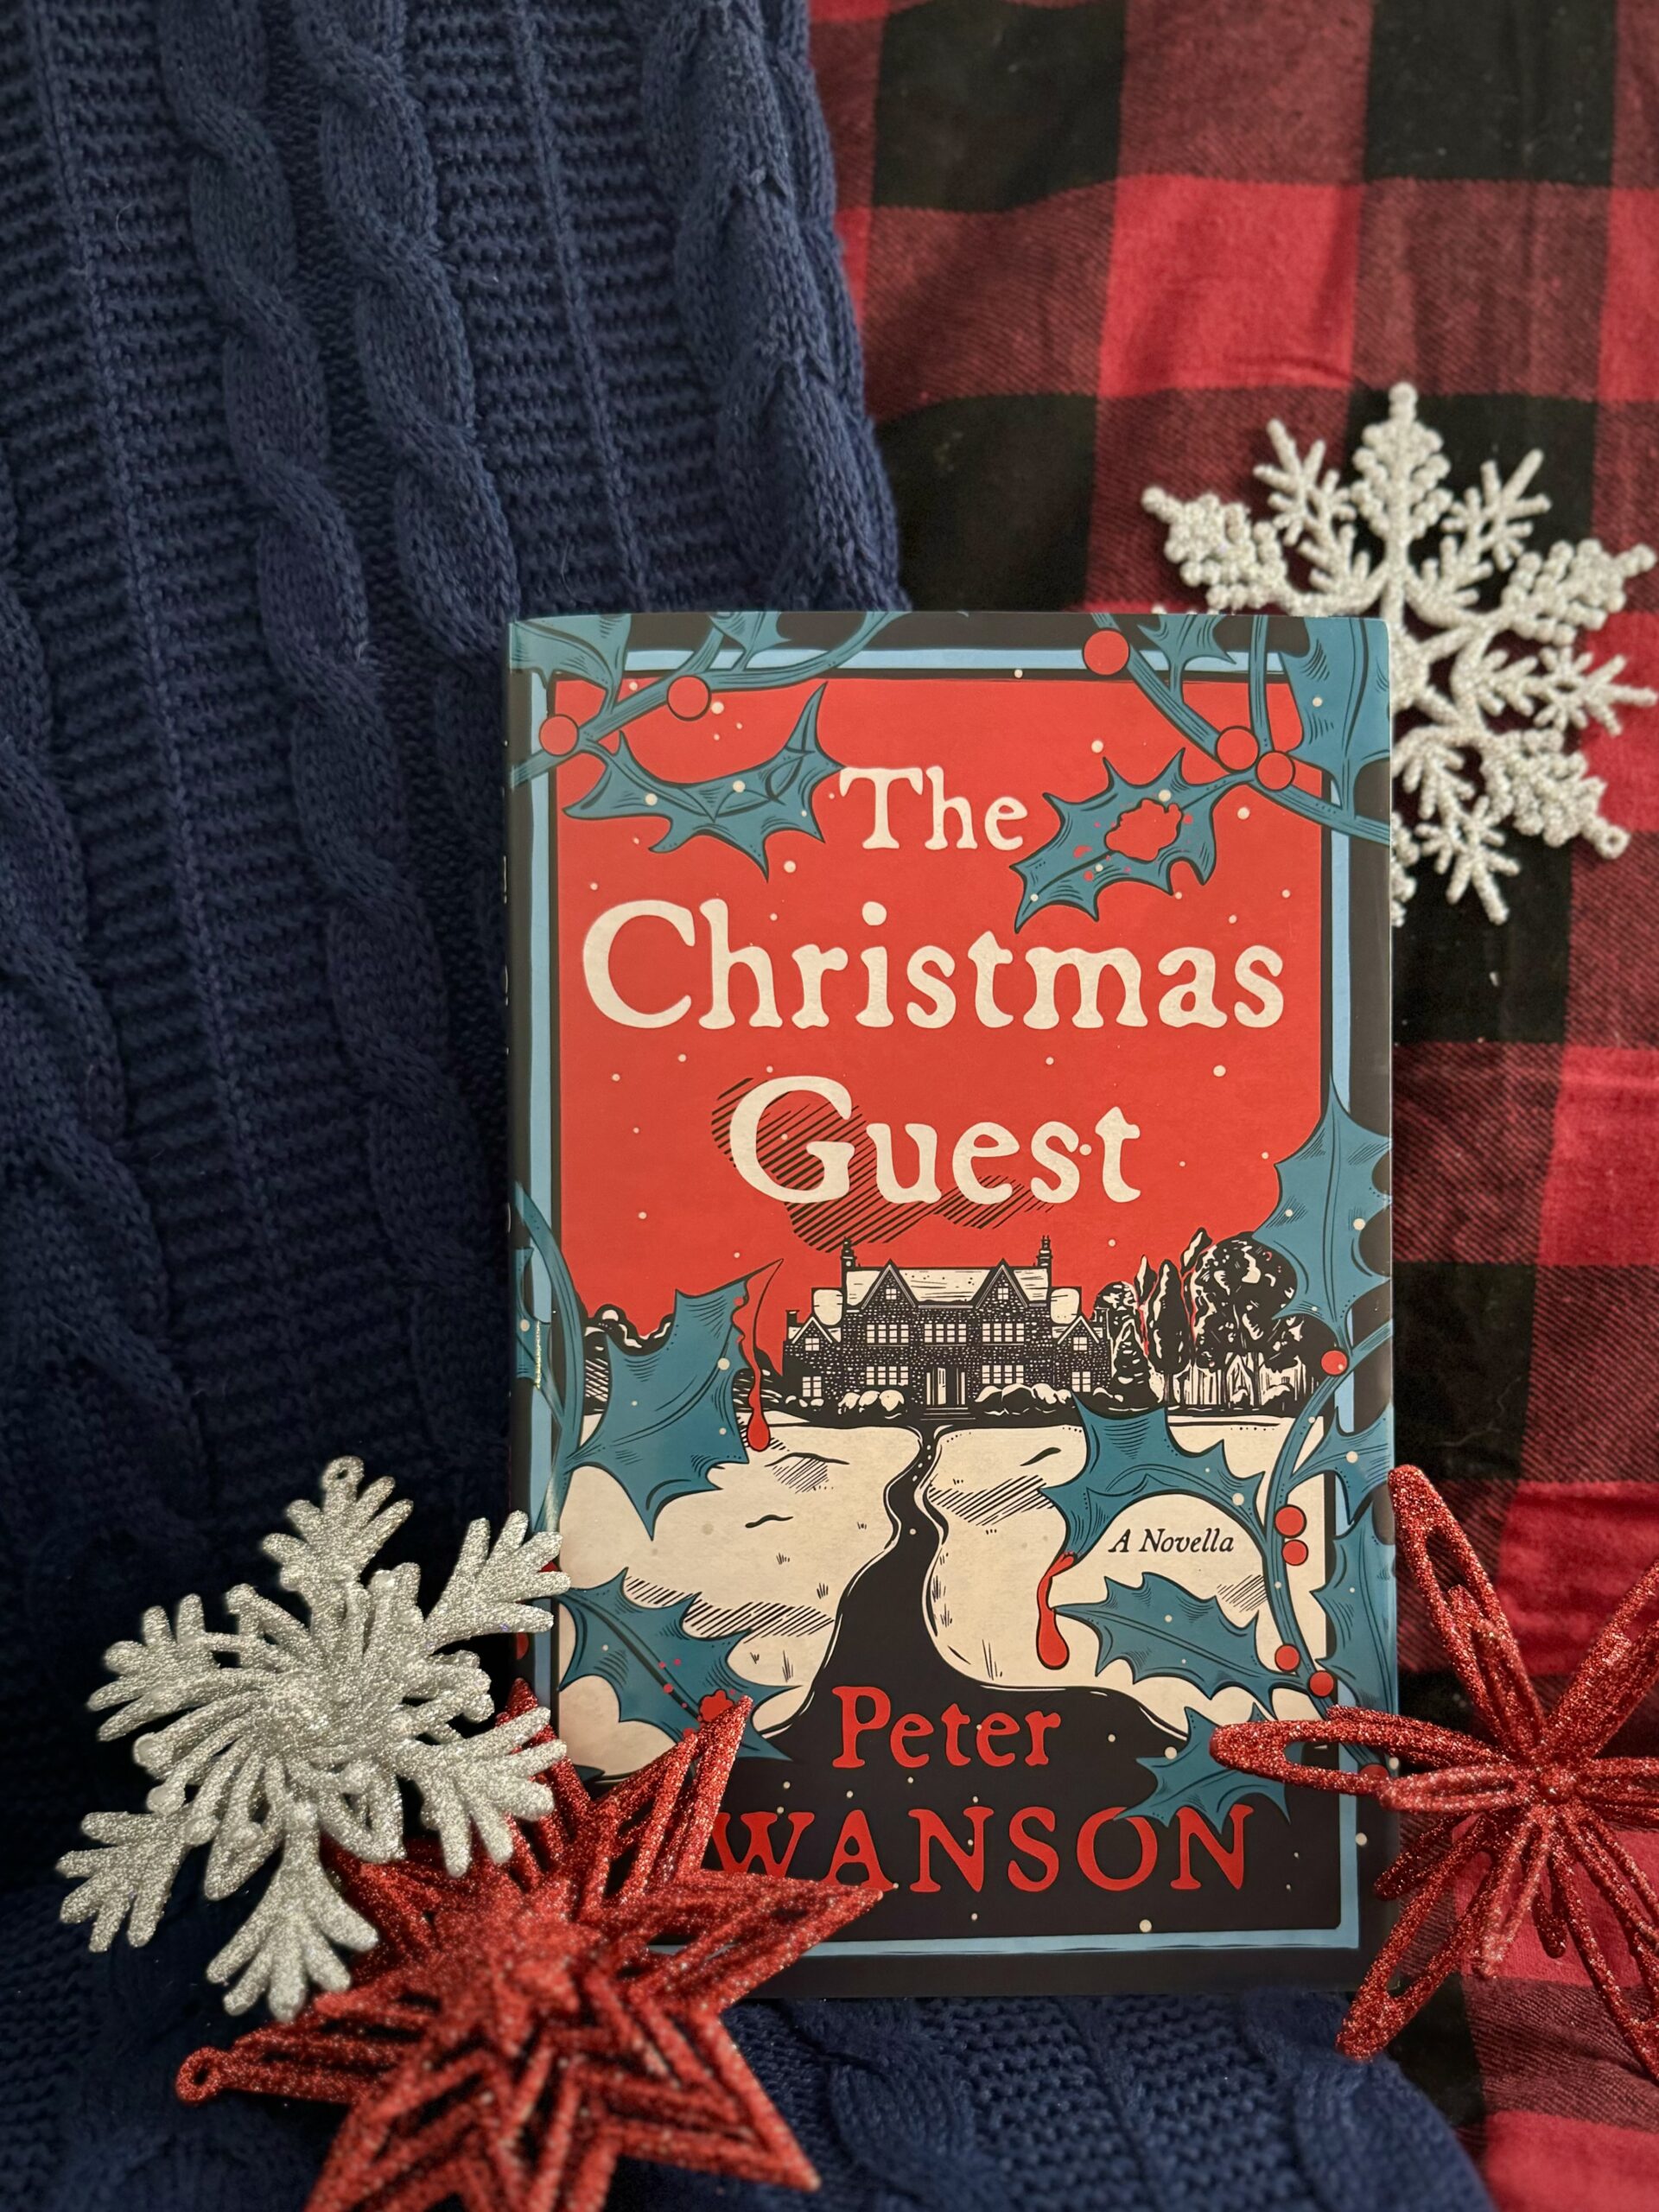 Advent of Mystery, Day 2: The Christmas Guest